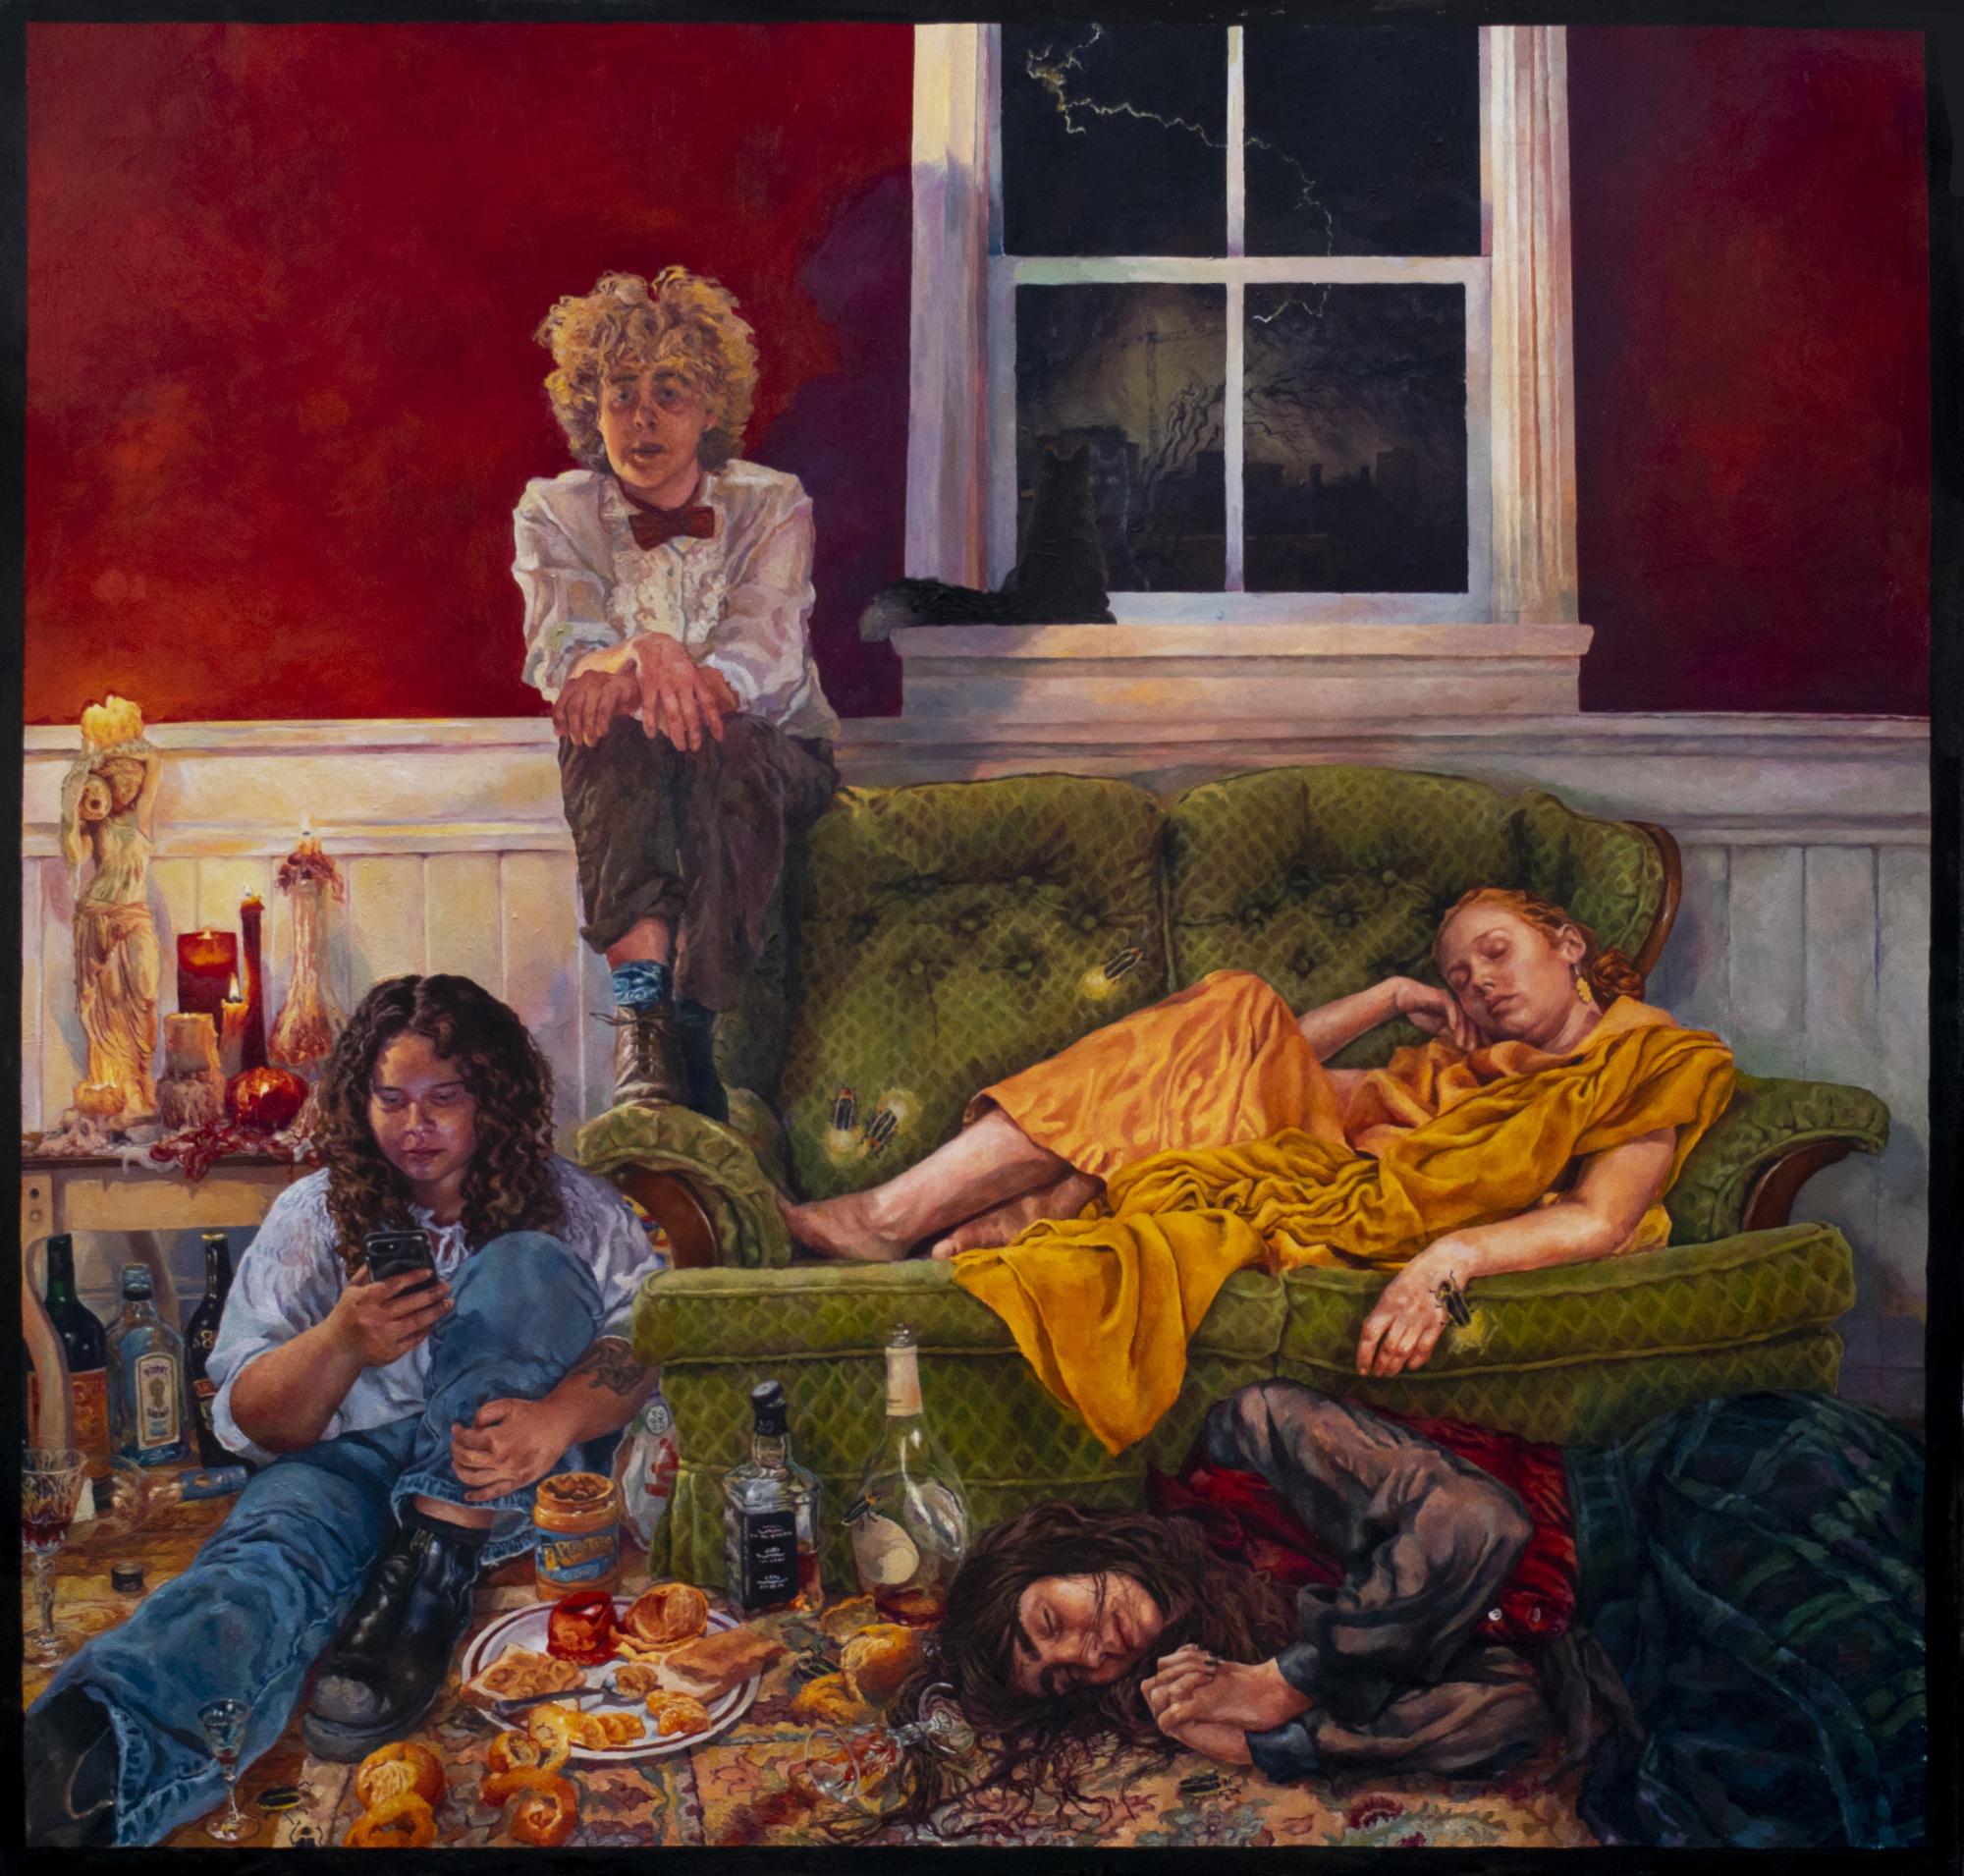 Painting of 4 friends relaxing after a dinner party. Food and drinks are littered through out the image. Two figures are on a couch, two are on the floor. 